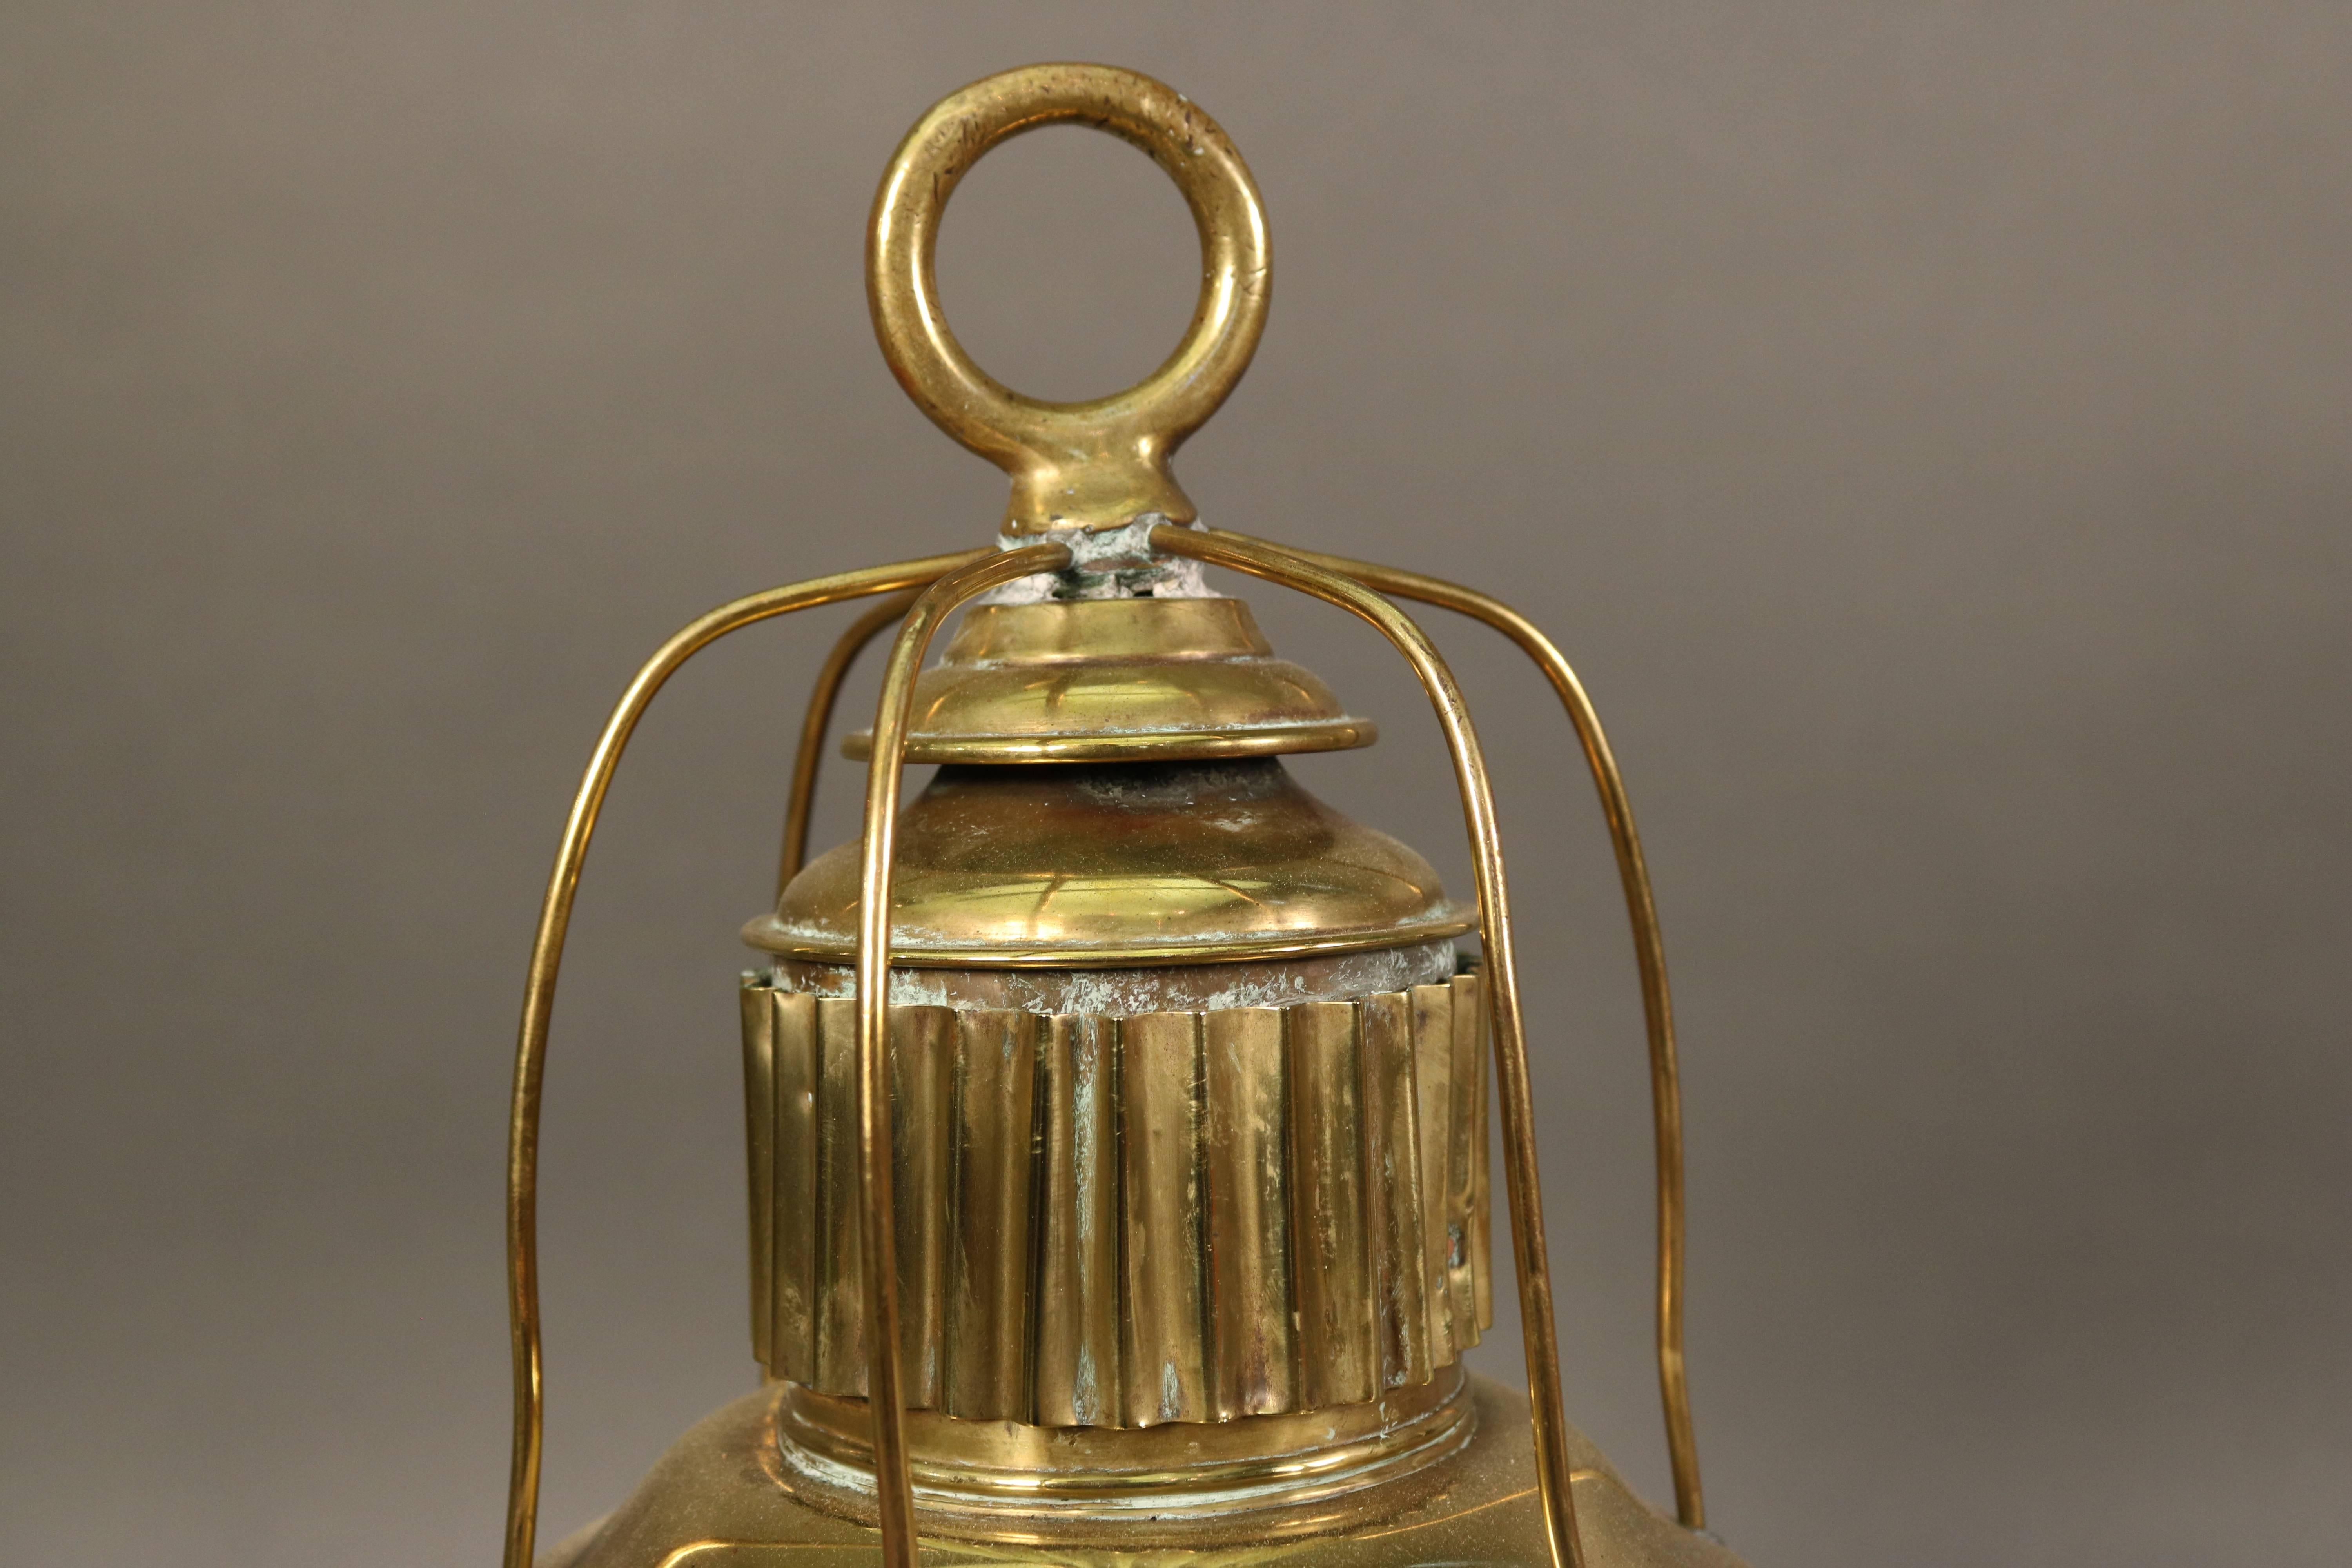 19th century ship's lantern with cobalt blue Fresnel lens, vented top, hoisting ring, protective bars, tether rings etc.. Fitted with an a/c socket.